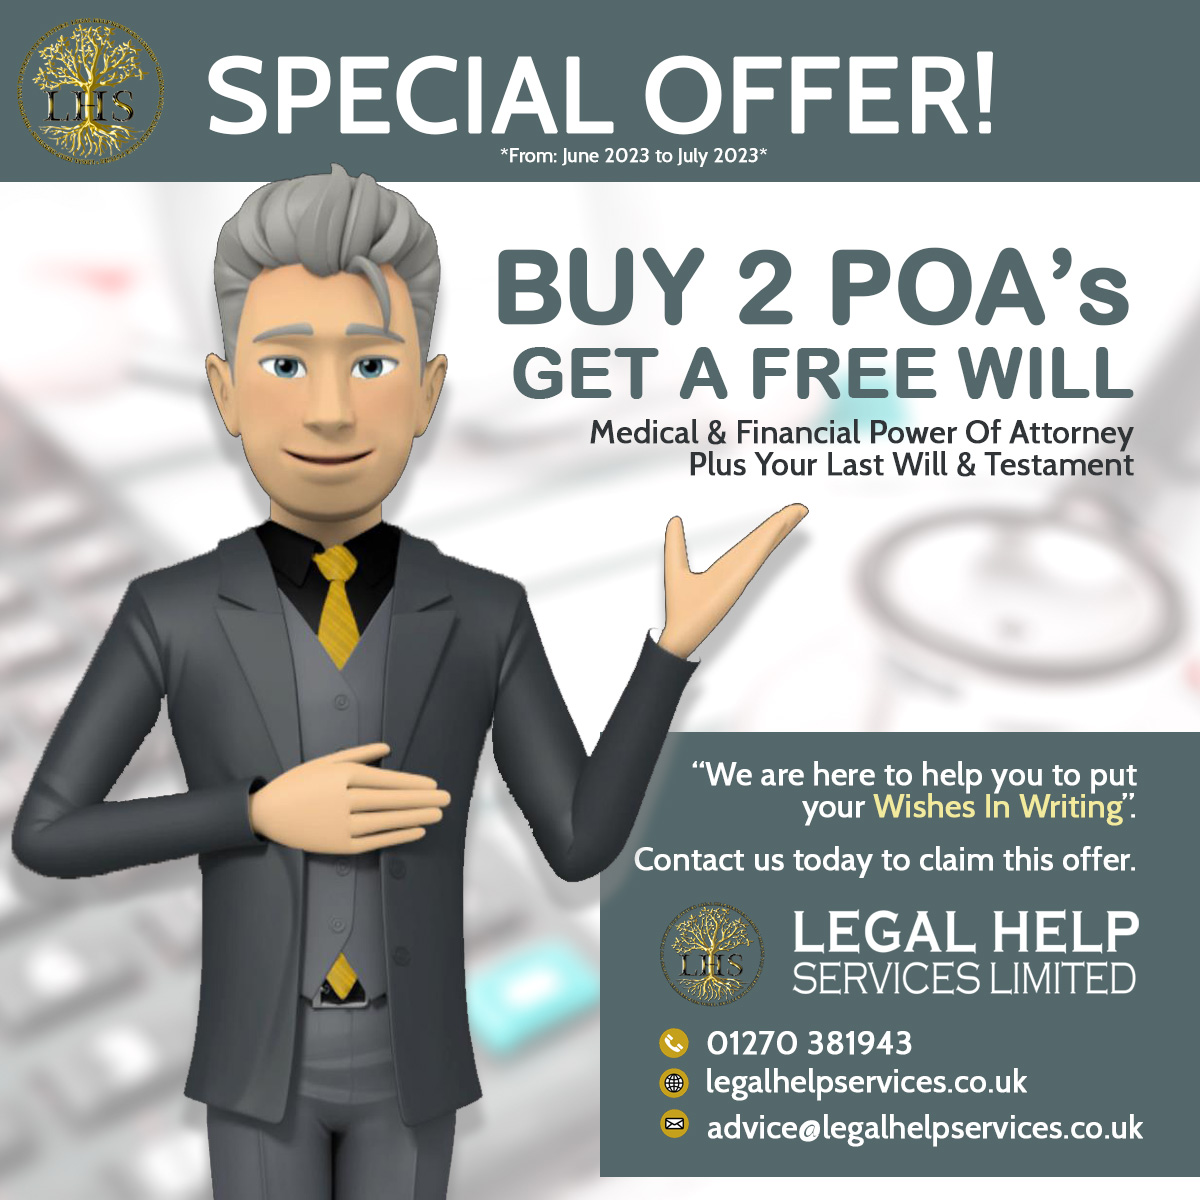 Exclusive Offer Alert: The Ultimate Power Trio! By securing both Medical and Financial Power of Attorneys with us, you'll receive our professional Will Writing service ABSOLUTELY FREE as a bonus! #SecureYourFuture #LegacyProtection #SeizeThePower